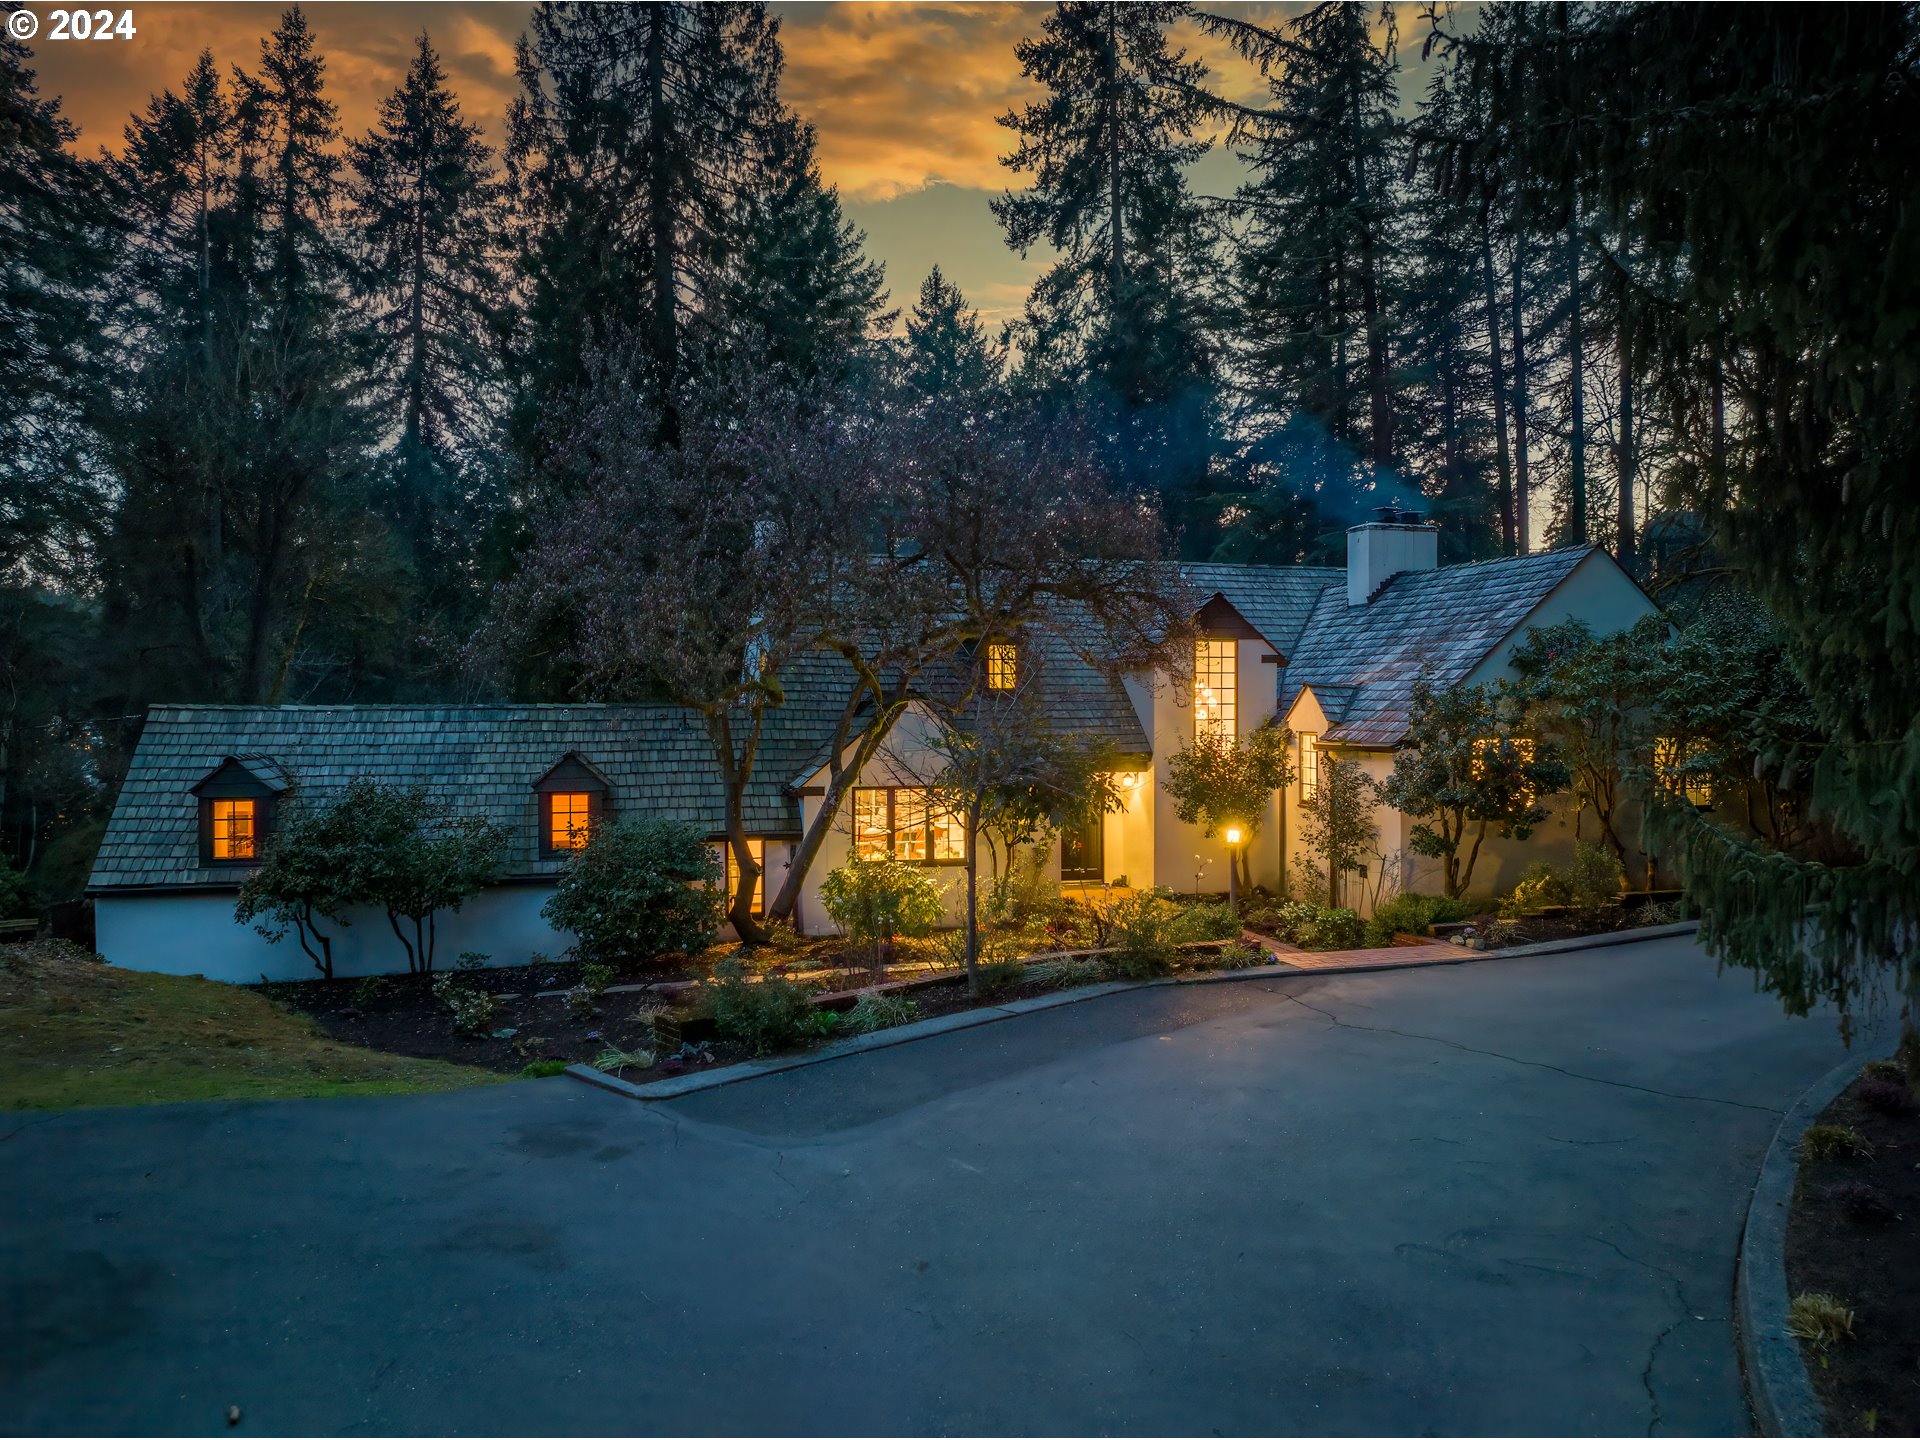 Historical Country Club estate with historical interest rate opportunity. 2.625% assumable loan for qualified buyers. Nestled within Lake Oswego's esteemed Country Club district, this venerable, nearly 100-year-old home is a timeless testament to luxury living, steeped in rich history and meticulously reimagined for modern comfort. Designed by renowned architect Richard Sundeleaf in 1936, this English farmhouse-inspired estate was built on the site of an iron ore quarry and the resulting amphitheater-like surroundings are a spectacular, unmatched, nearly 1 acre private setting. Recently reimagined to perfection, every detail of its Tudor-influenced design has been thoughtfully preserved, from the stucco exterior to the steeply-pitched gables and half-timbering. This home is a seamless blend of classic elegance and contemporary amenities, including an English manor-inspired kitchen, a sunlit dining room, and two primary suites. Situated just minutes from downtown LO, top-rated schools, and outdoor recreation, walking distance to the Forest Hills easement, this exceptional property offers an unmatched opportunity to experience the epitome of Lake Oswego living.